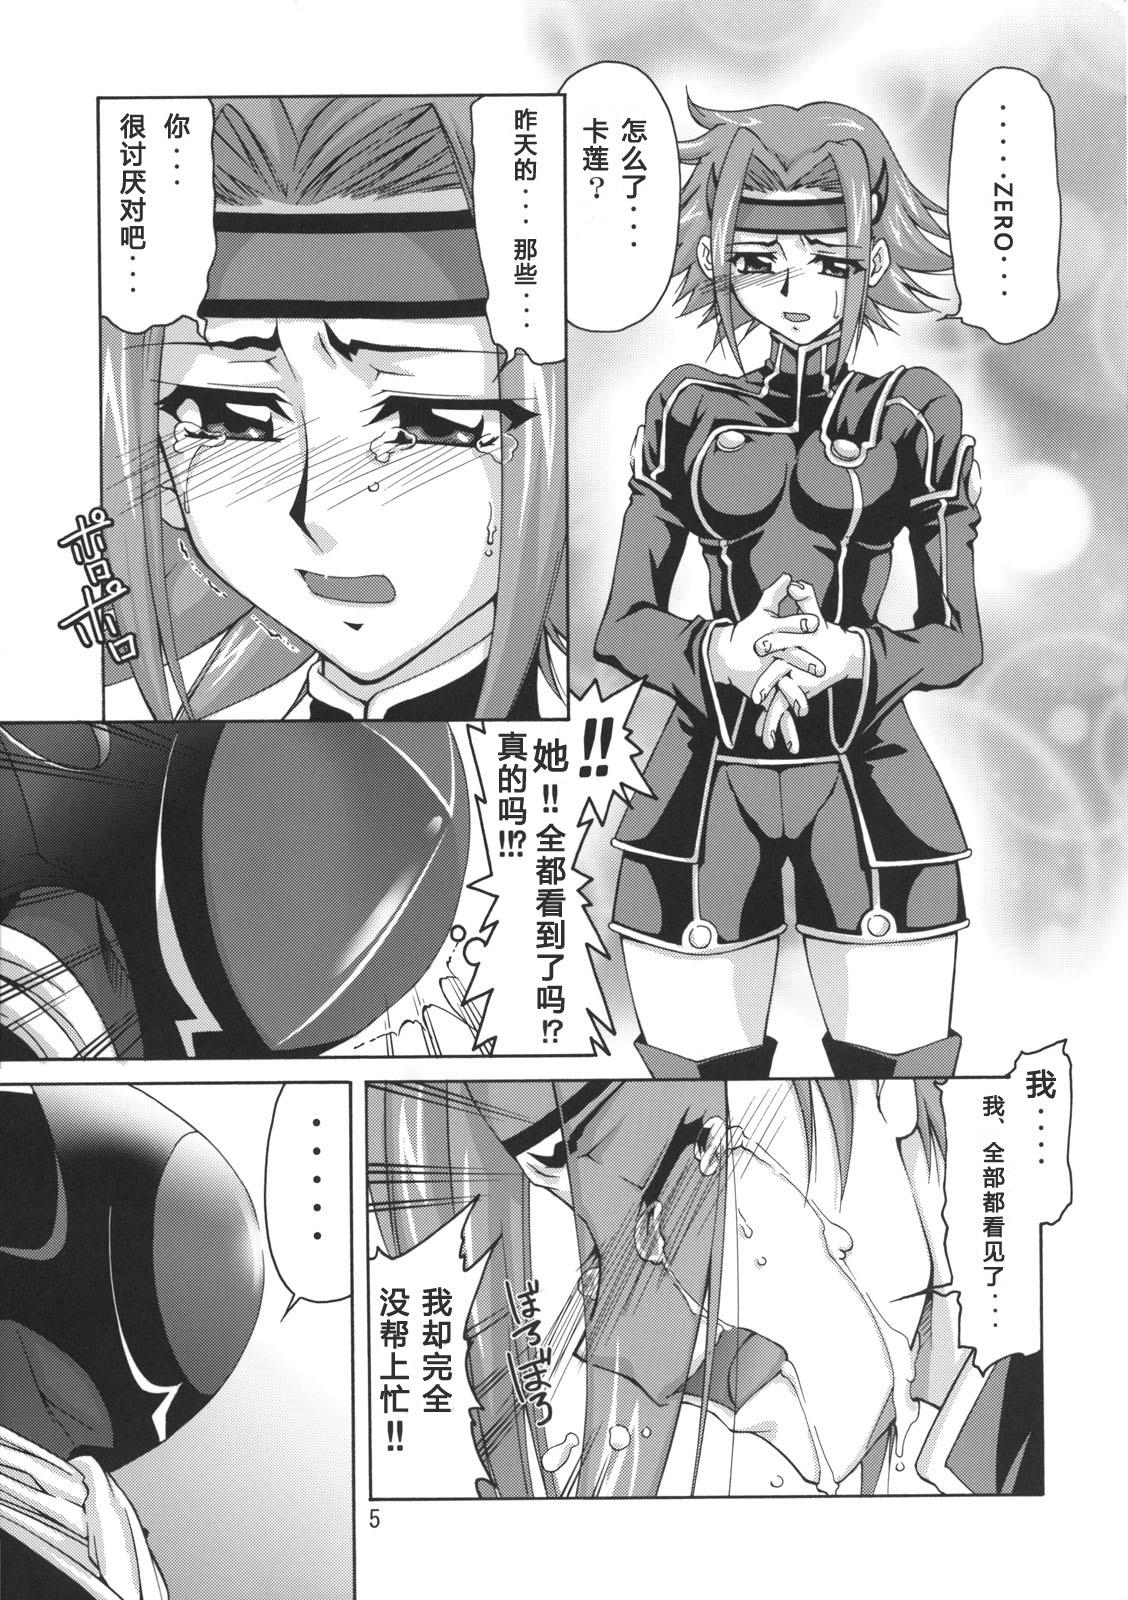 Cougar C:G²R 02 - Code geass Black Girl - Page 4